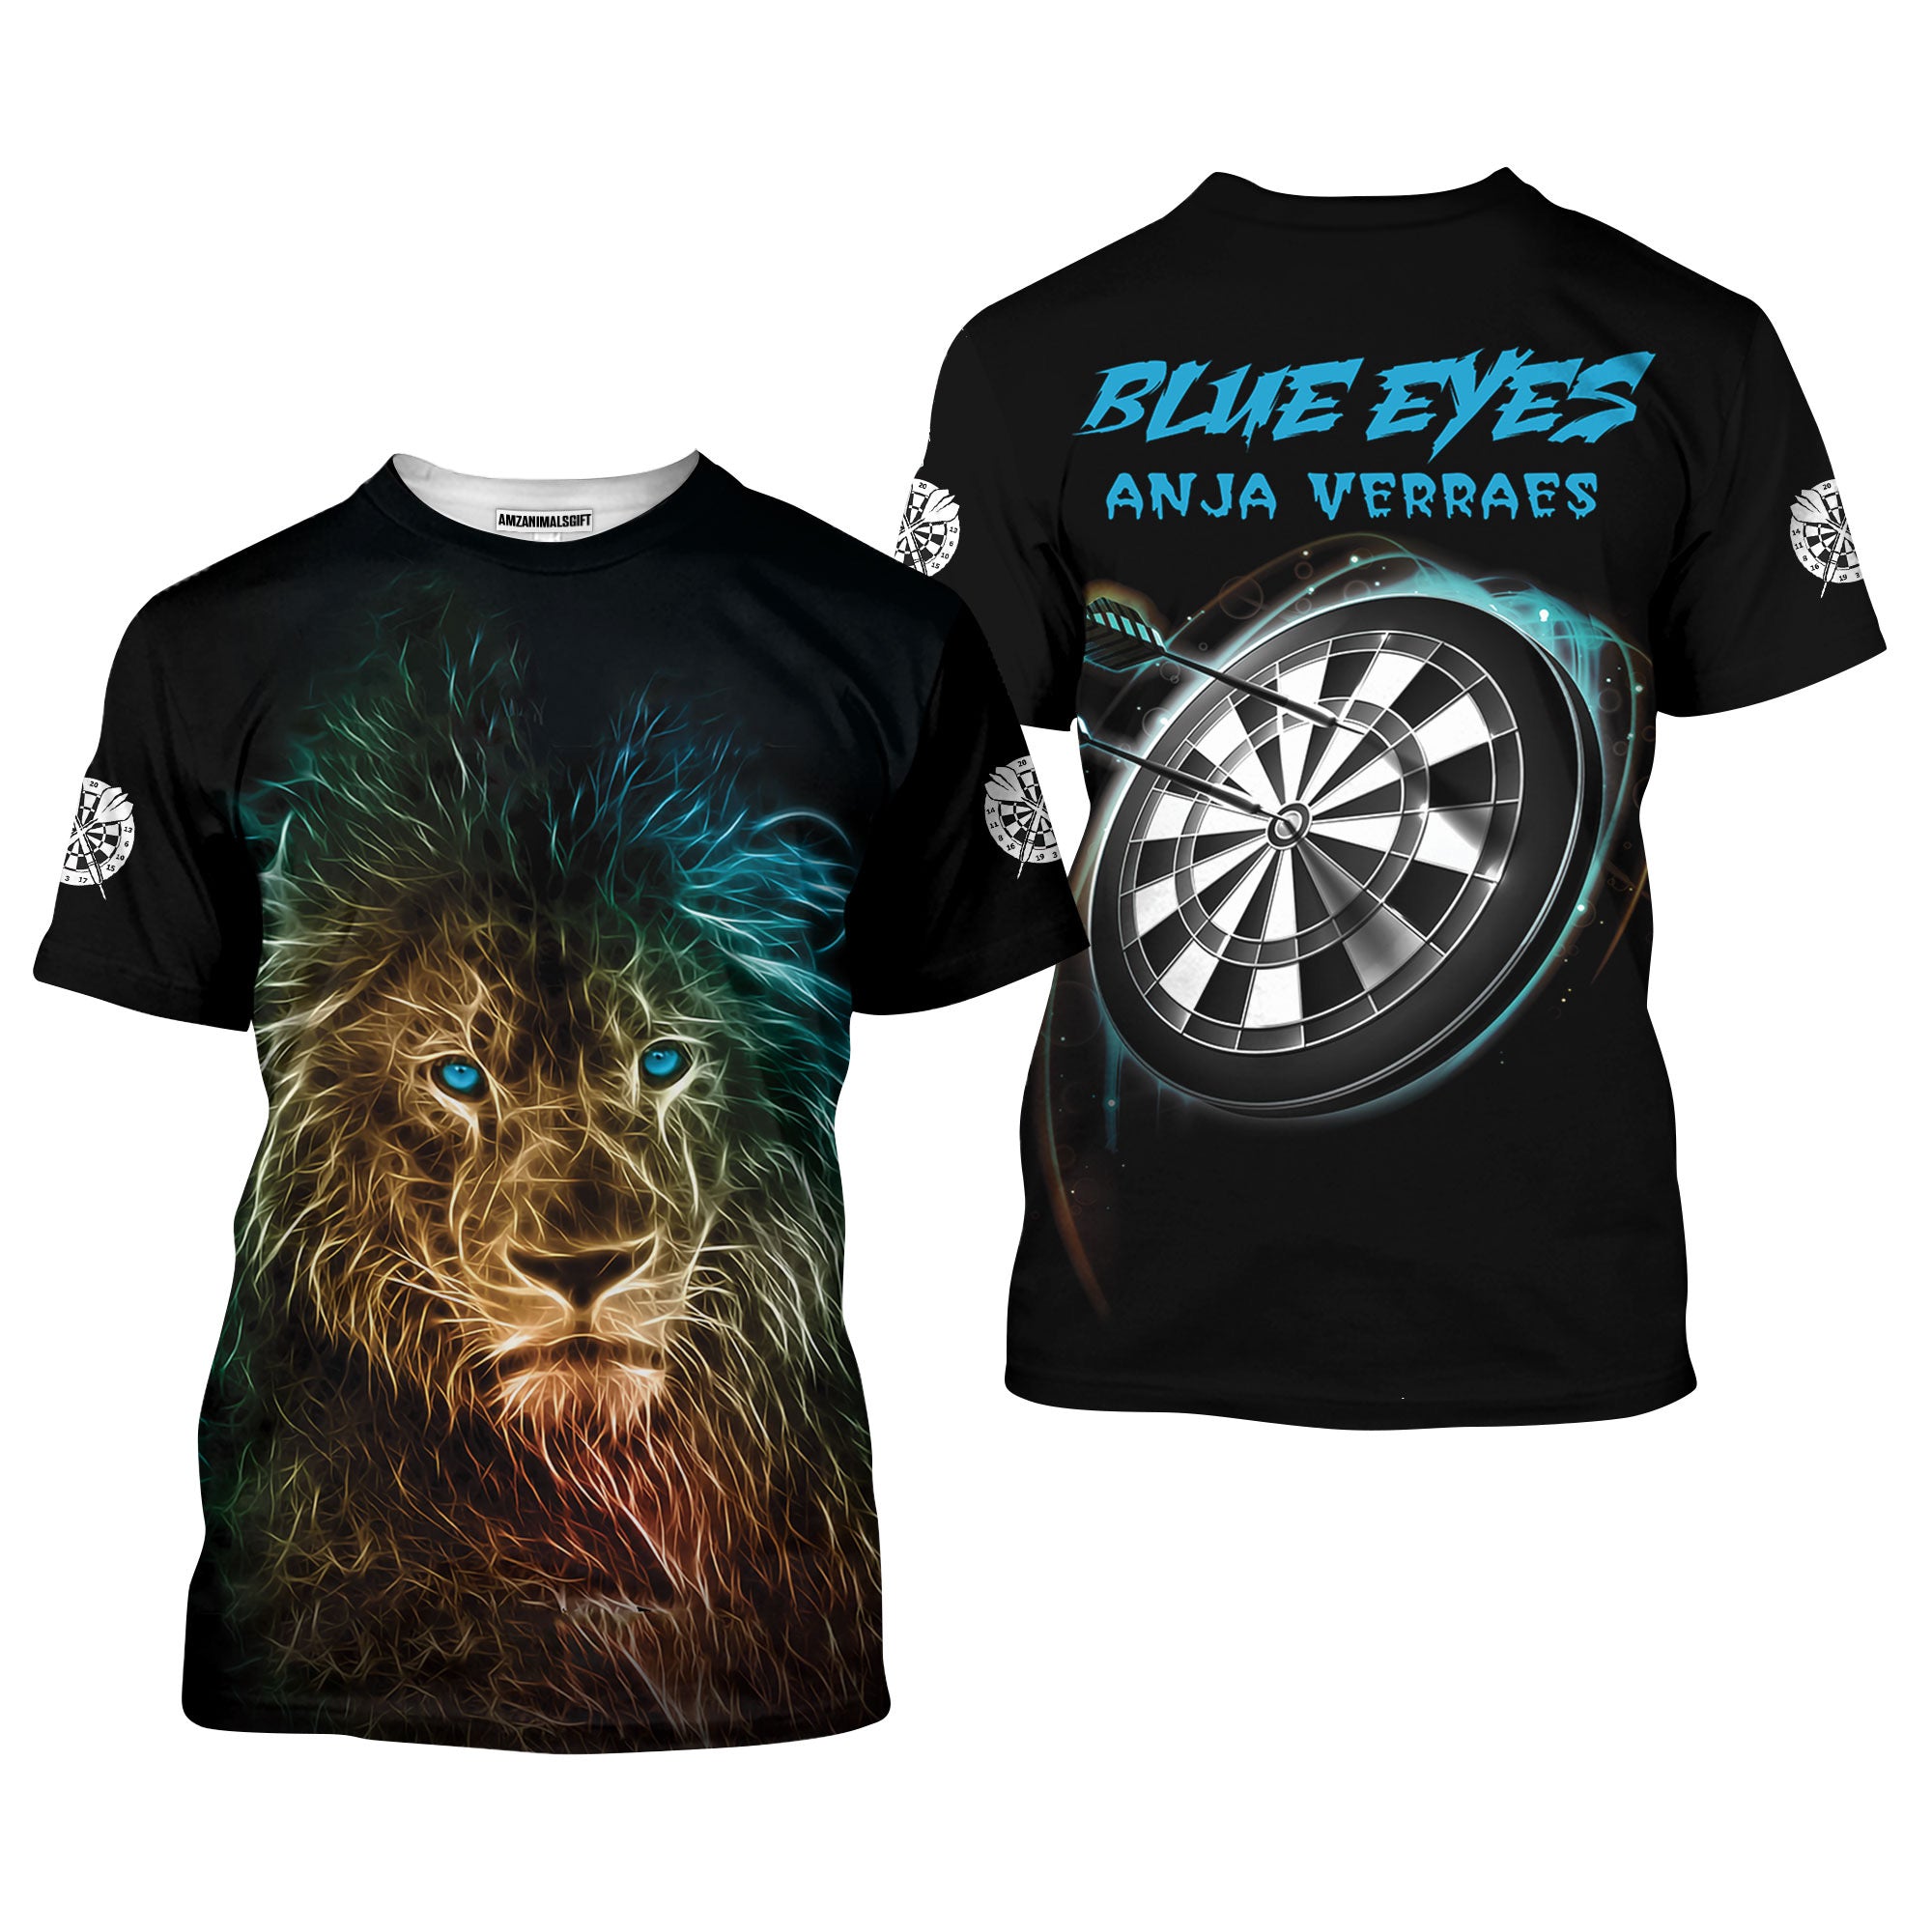 Customized Darts And Lions T Shirt, Personalized Text T Shirt For Men, Outfit For Darts Lovers, Darts Players